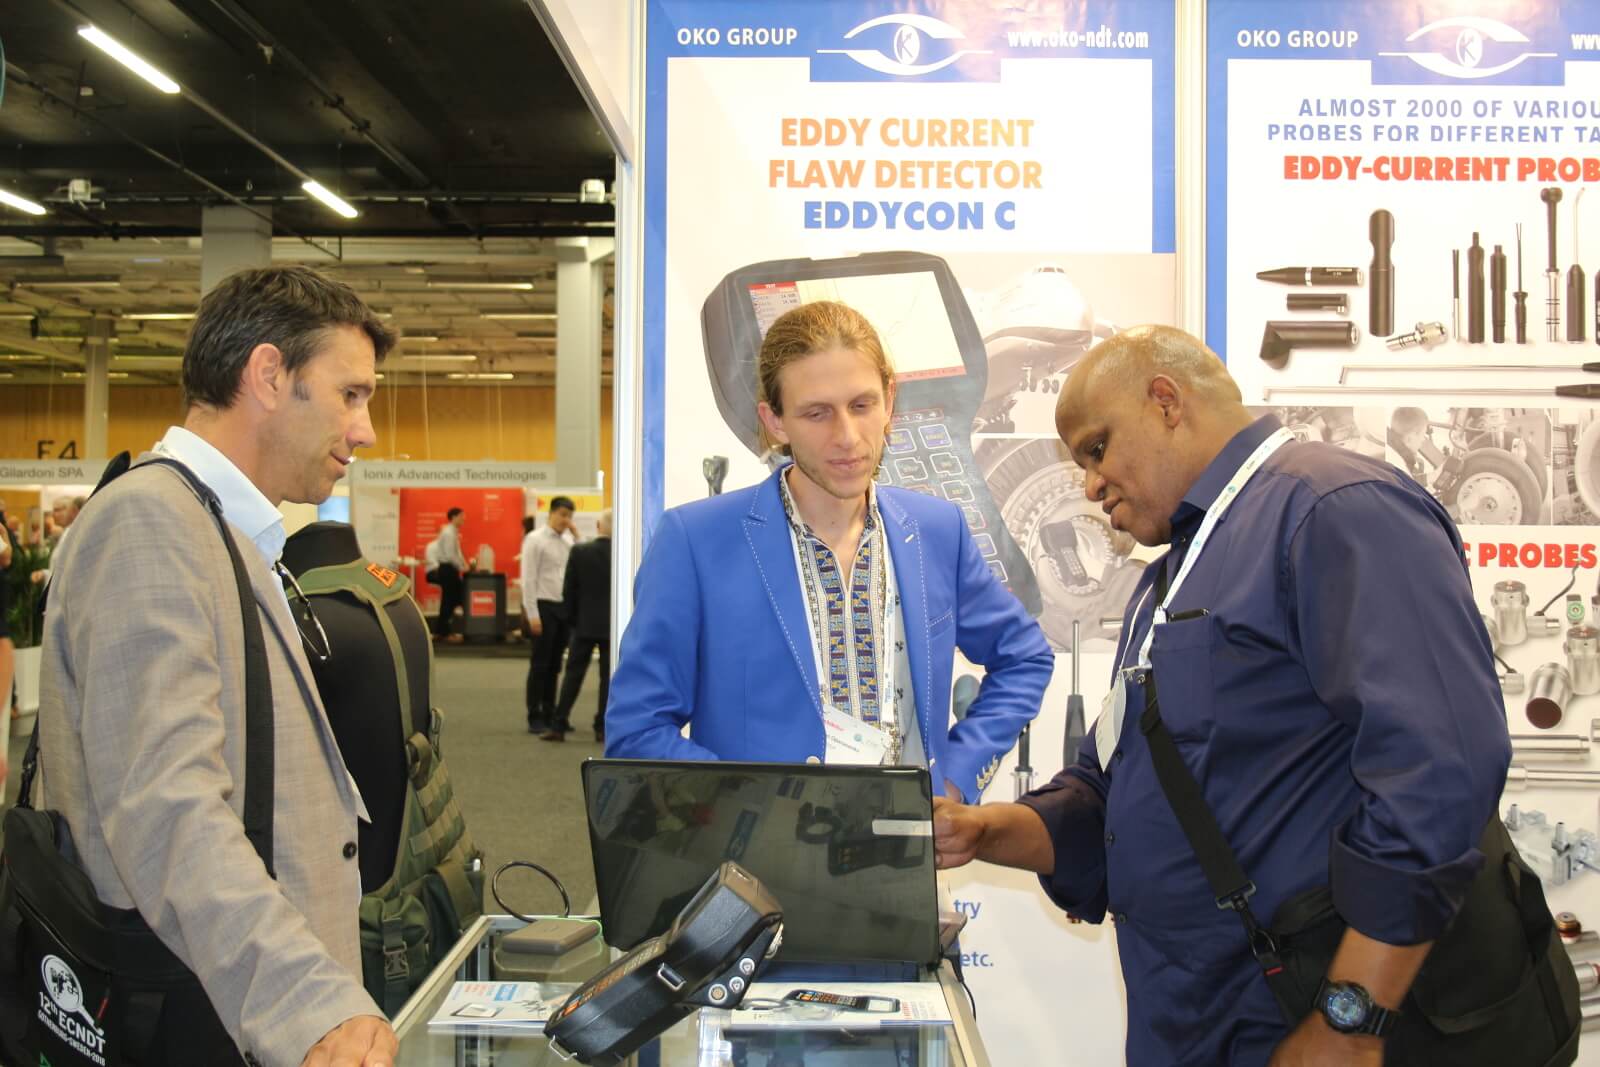 Attendees of ECNDT-18 are interested in OKOndt Group's NDT equipment